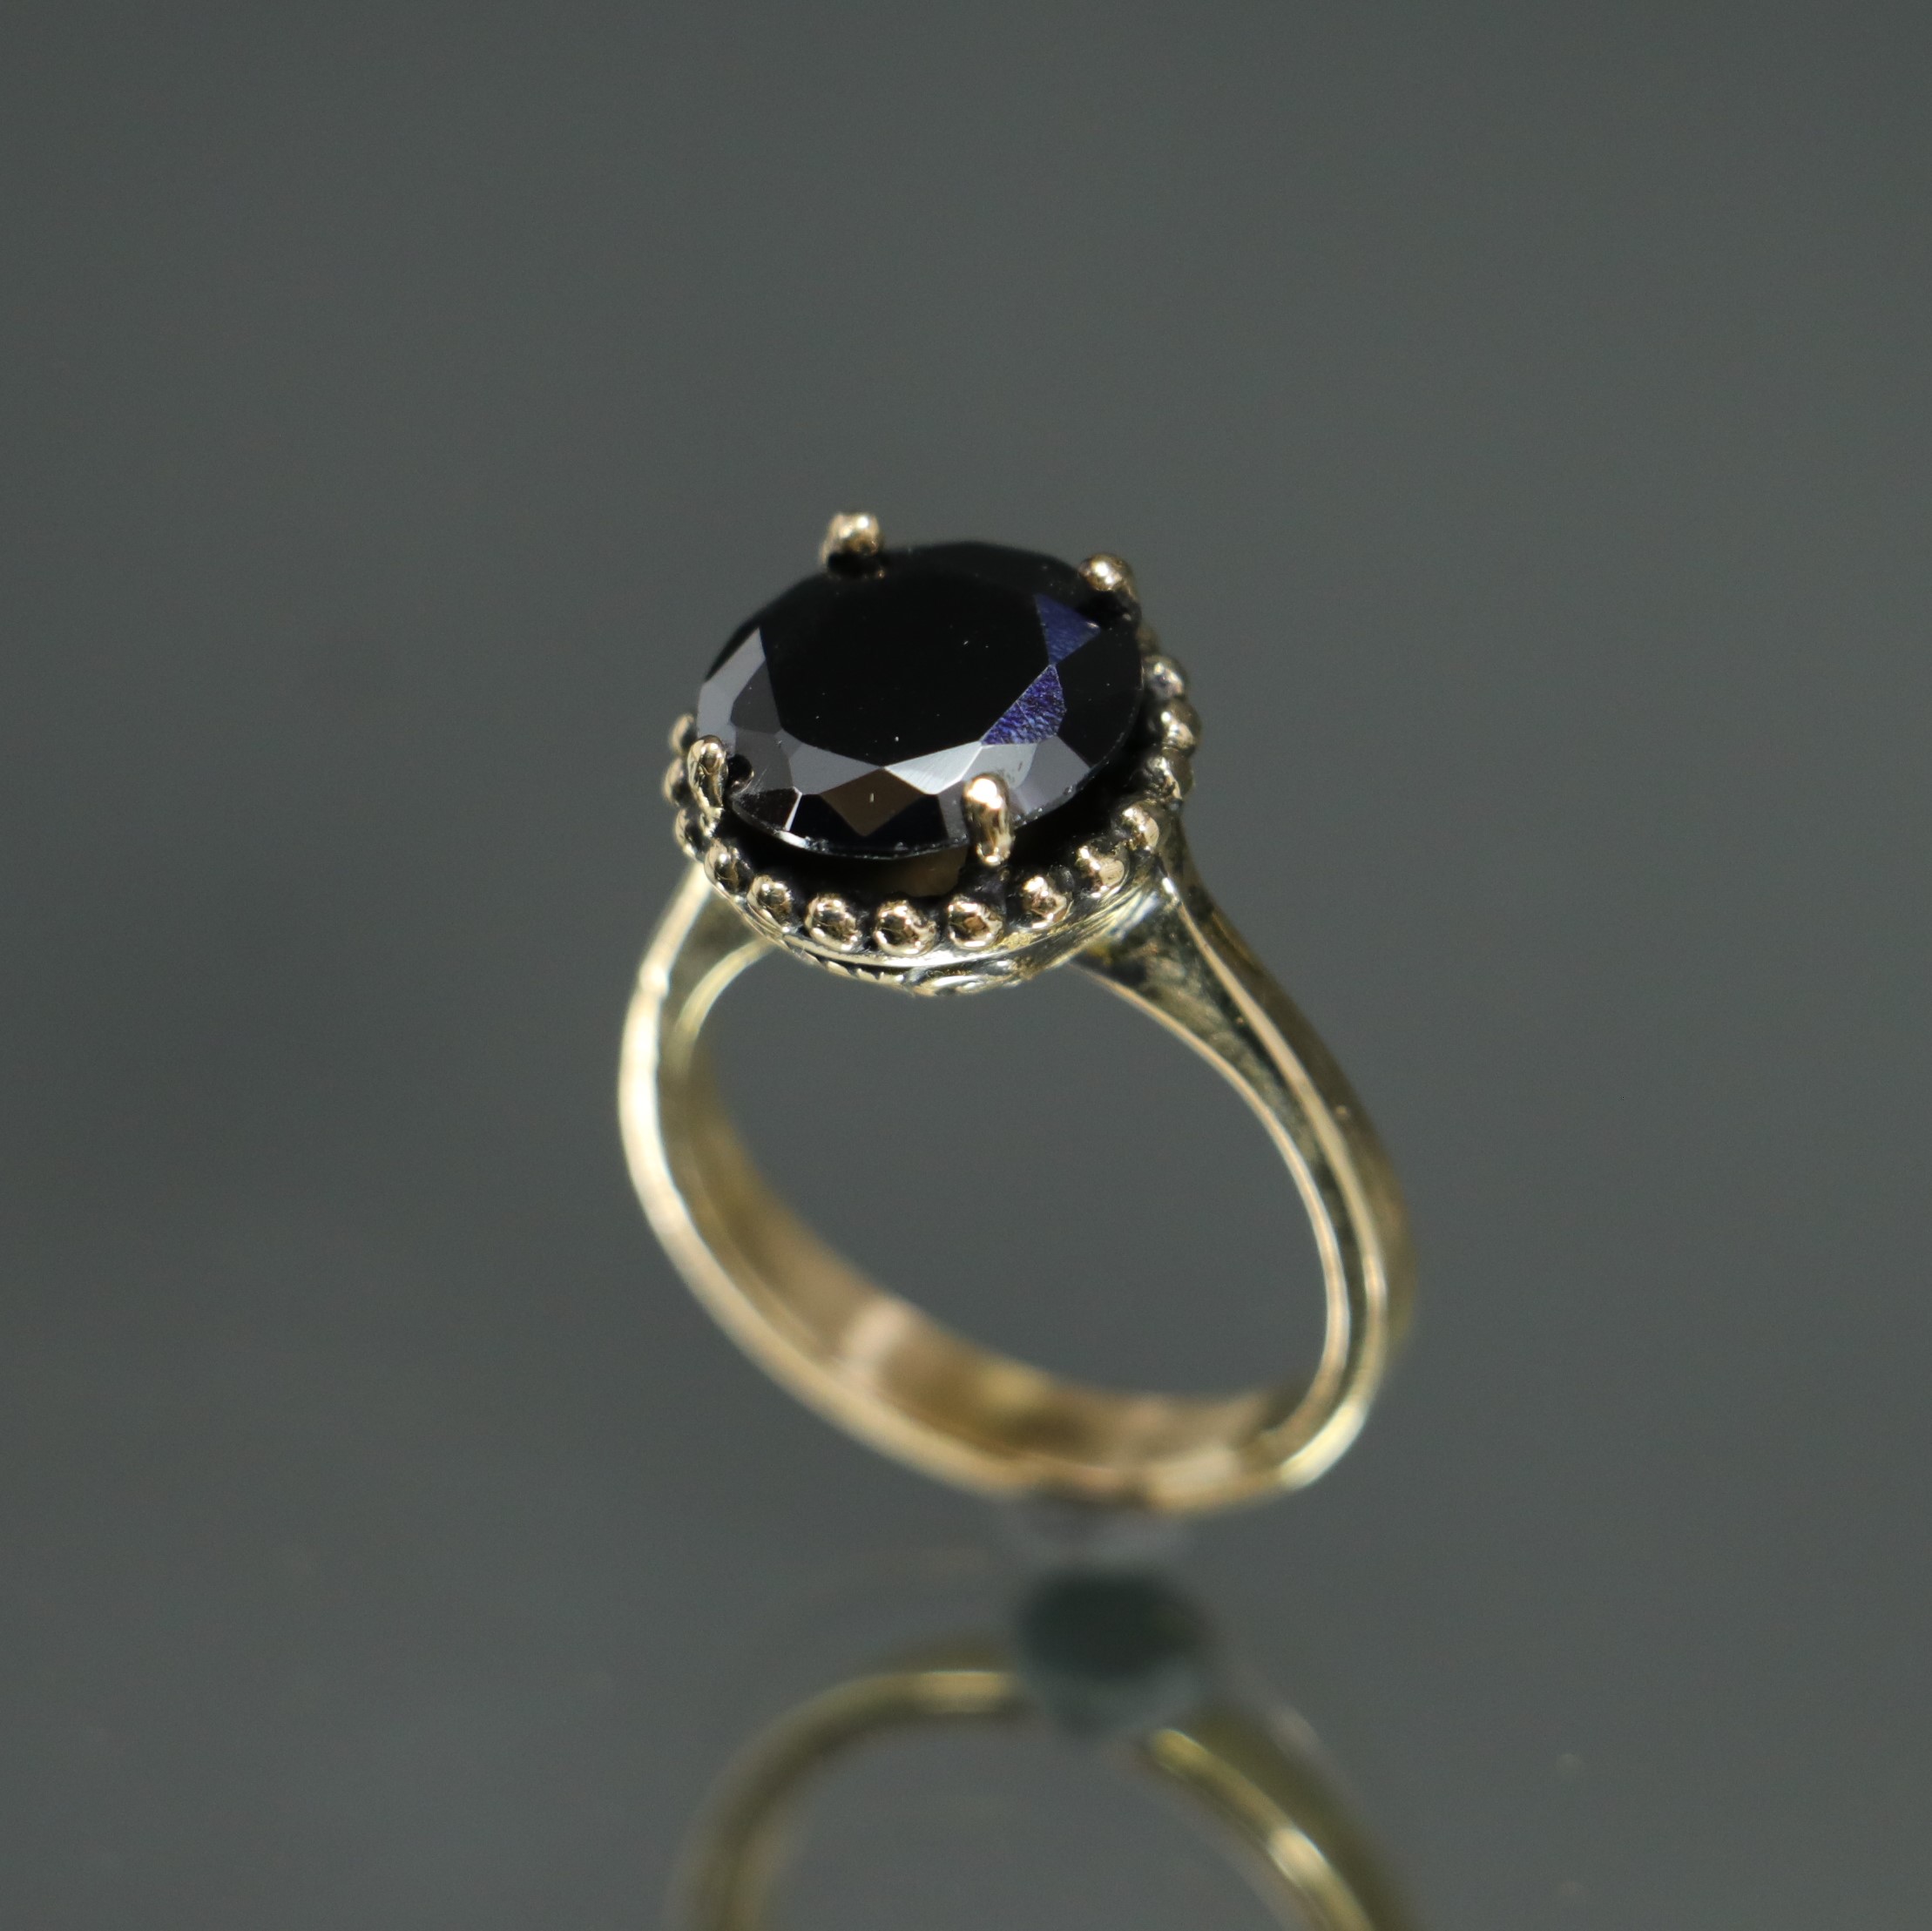 Onyx Stone Pen Embroidered Ring